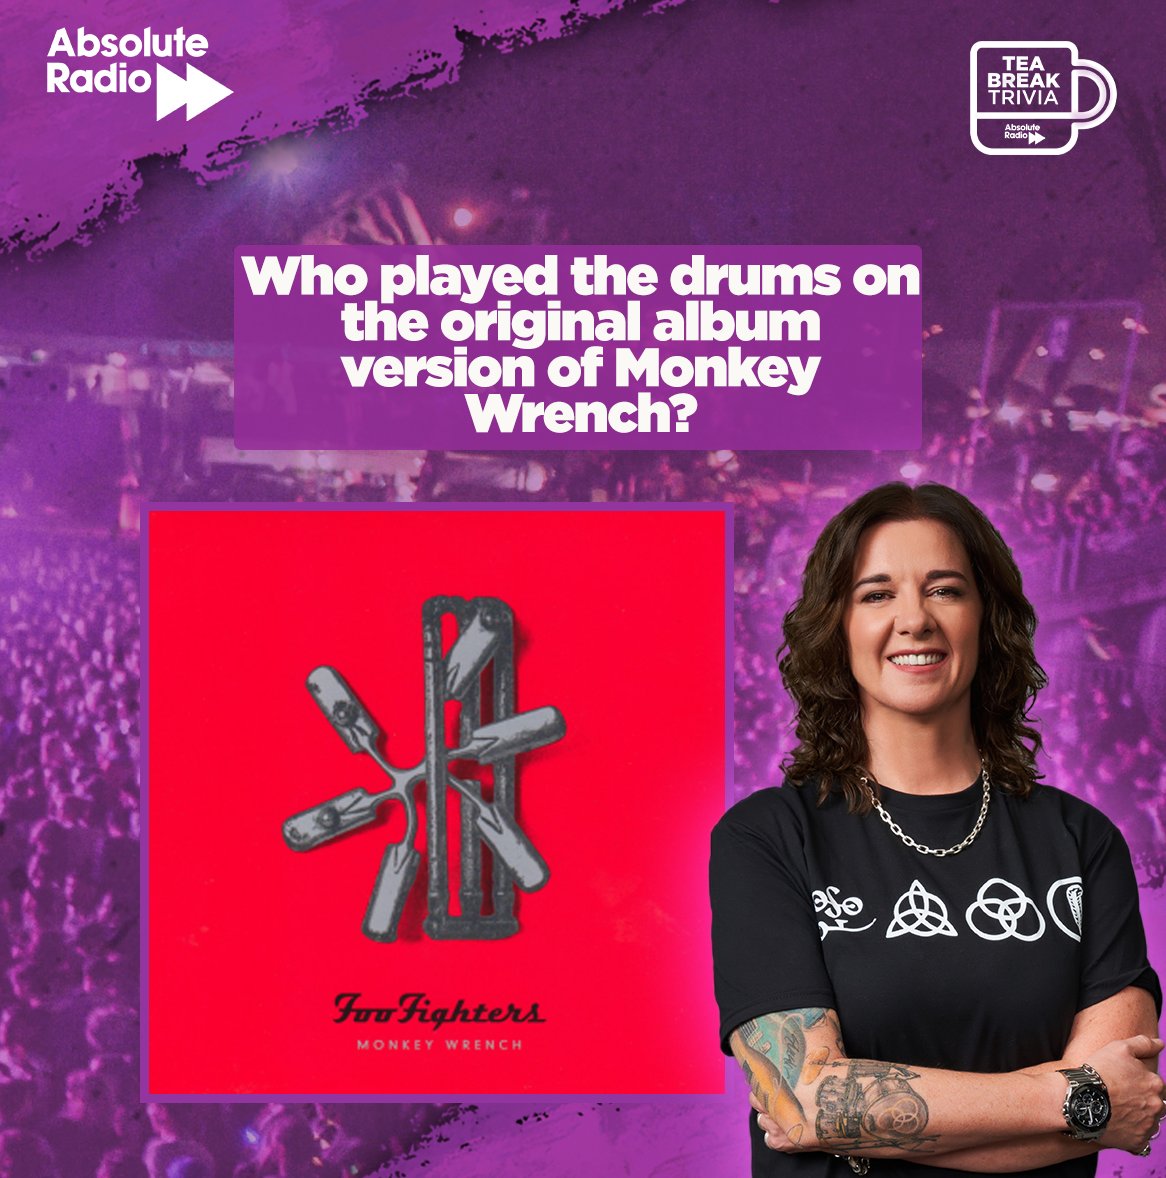 Stick on the kettle and think about @leonagraham's #TeaBreakTrivia question... Who played the drums on the original album version of Monkey Wrench by Foo Fighters?